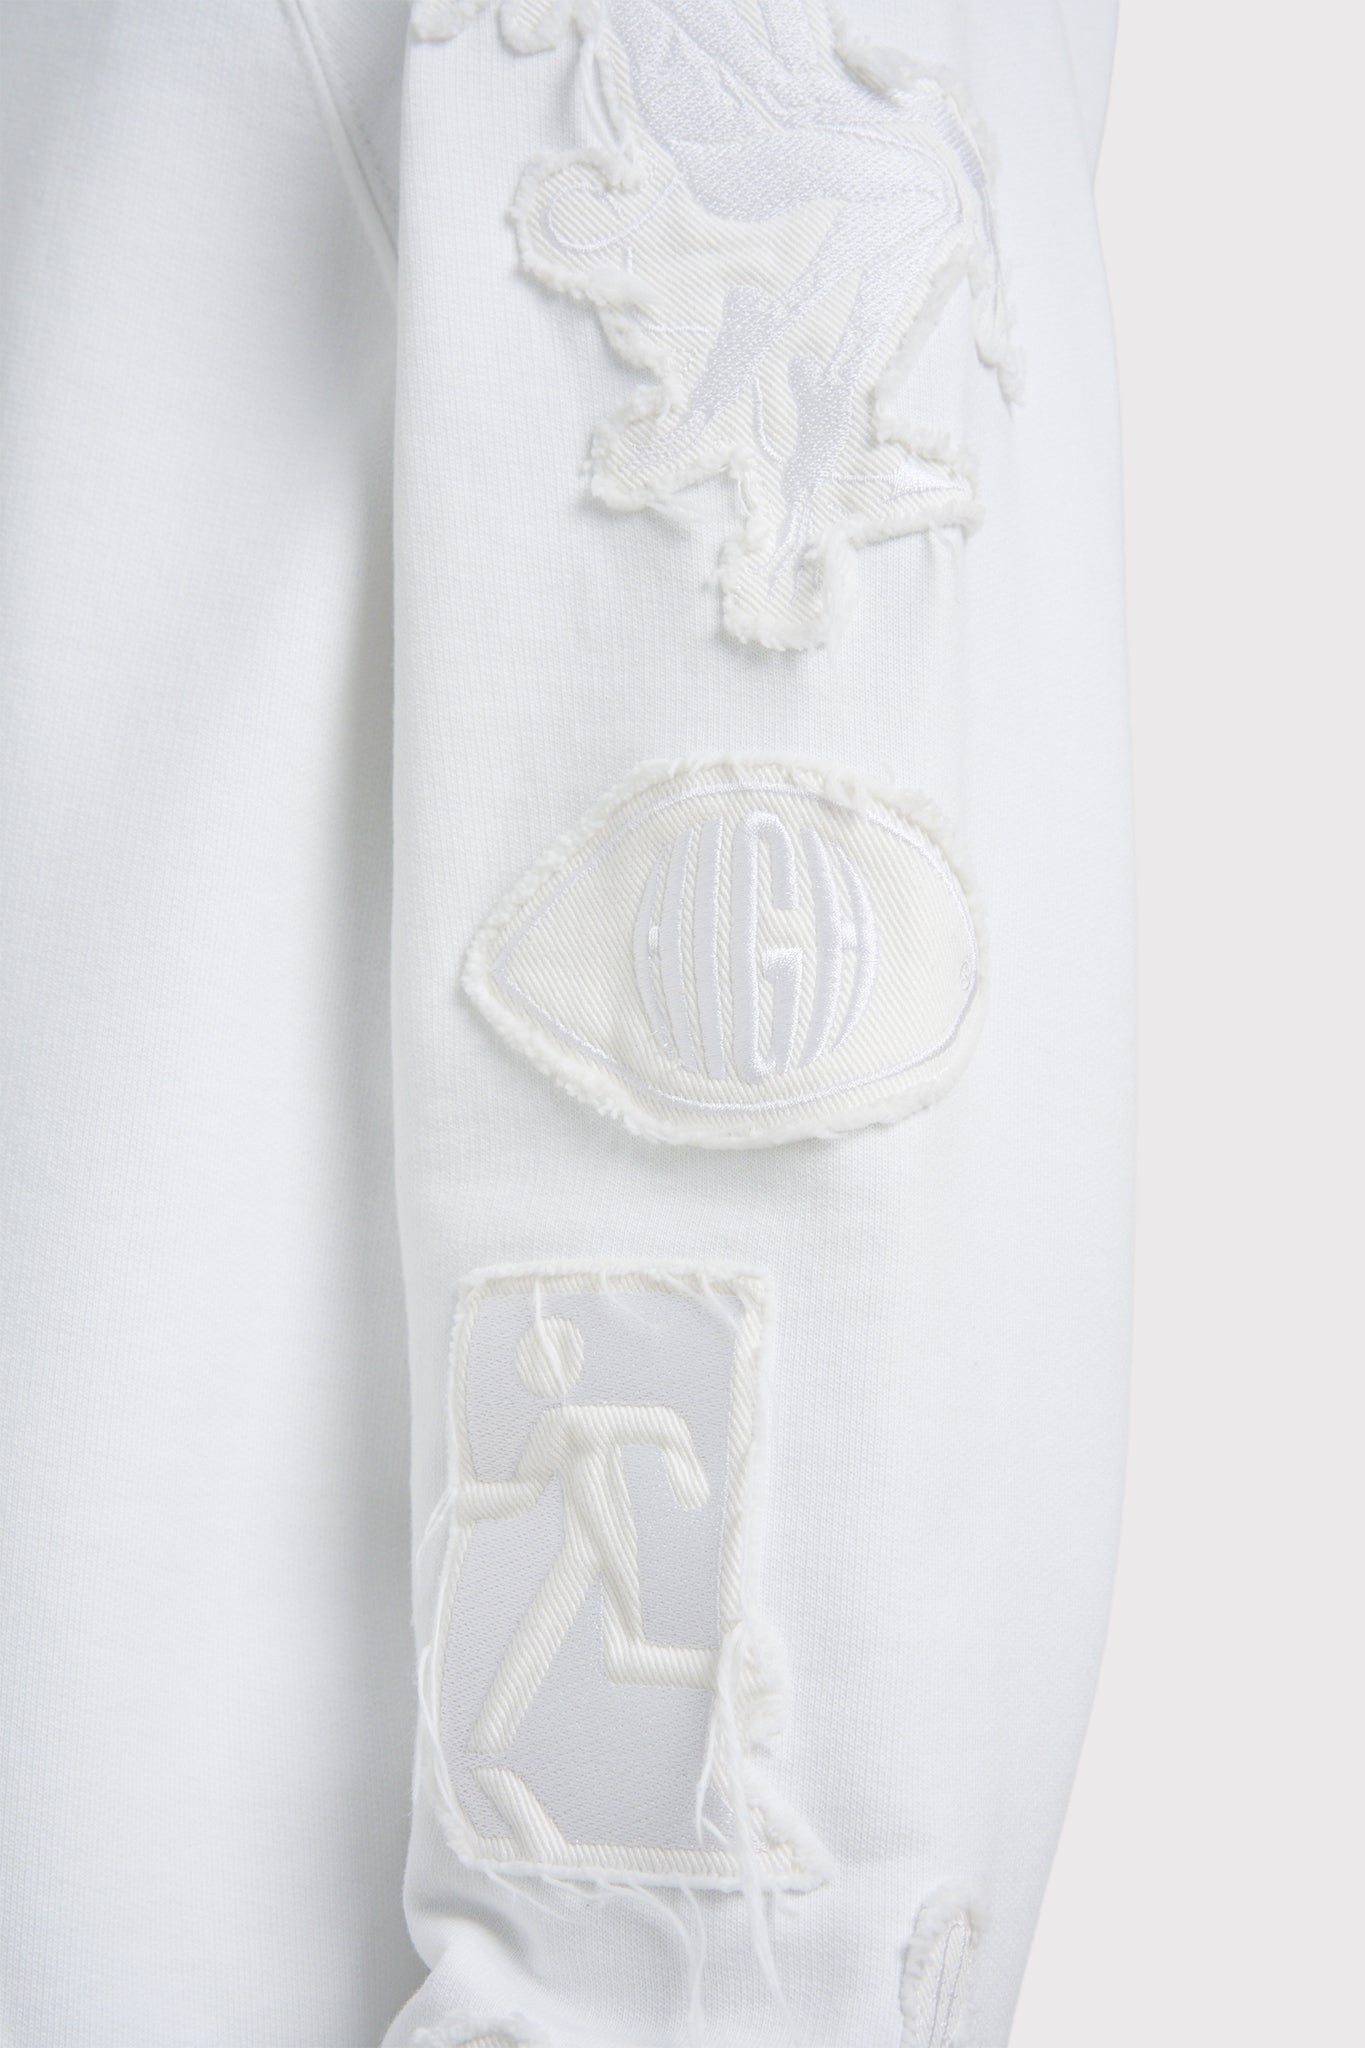 ÉTUDES RACING WITH PATCHES WHITE SWEATSHIRTS 2